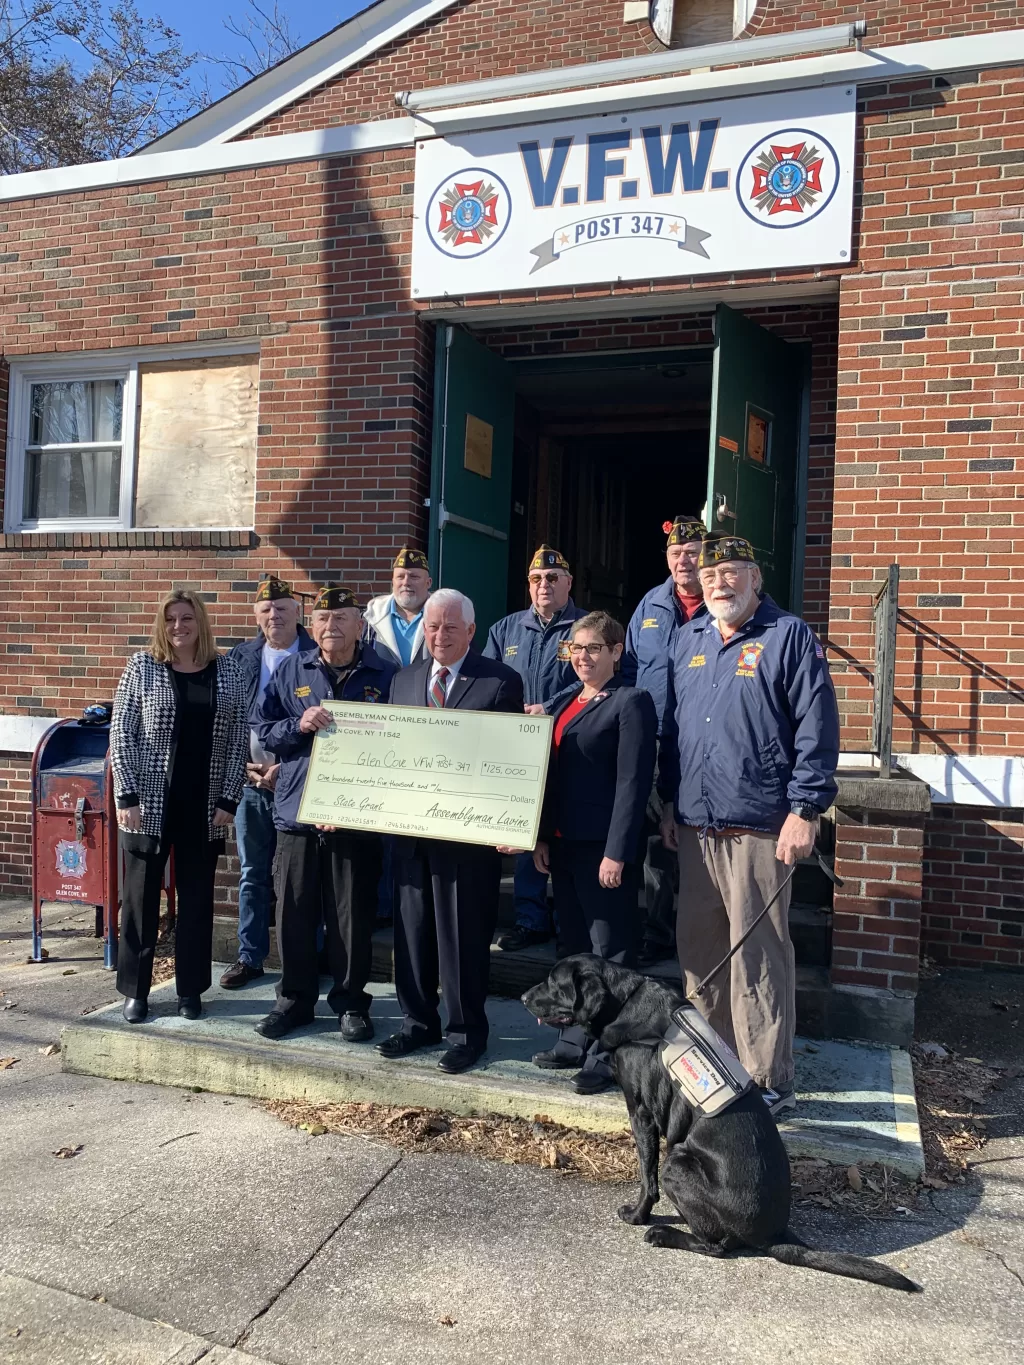 (Photo: Office of Charles D. Lavine) NYS Assemblyman Charles D. Lavine is joined by members of VFW 347 along with Glen Cove City Councilwomen Marsha Silverman and Danielle Fugazy Scagliola to announce a grant which will help complete the rebuilding.